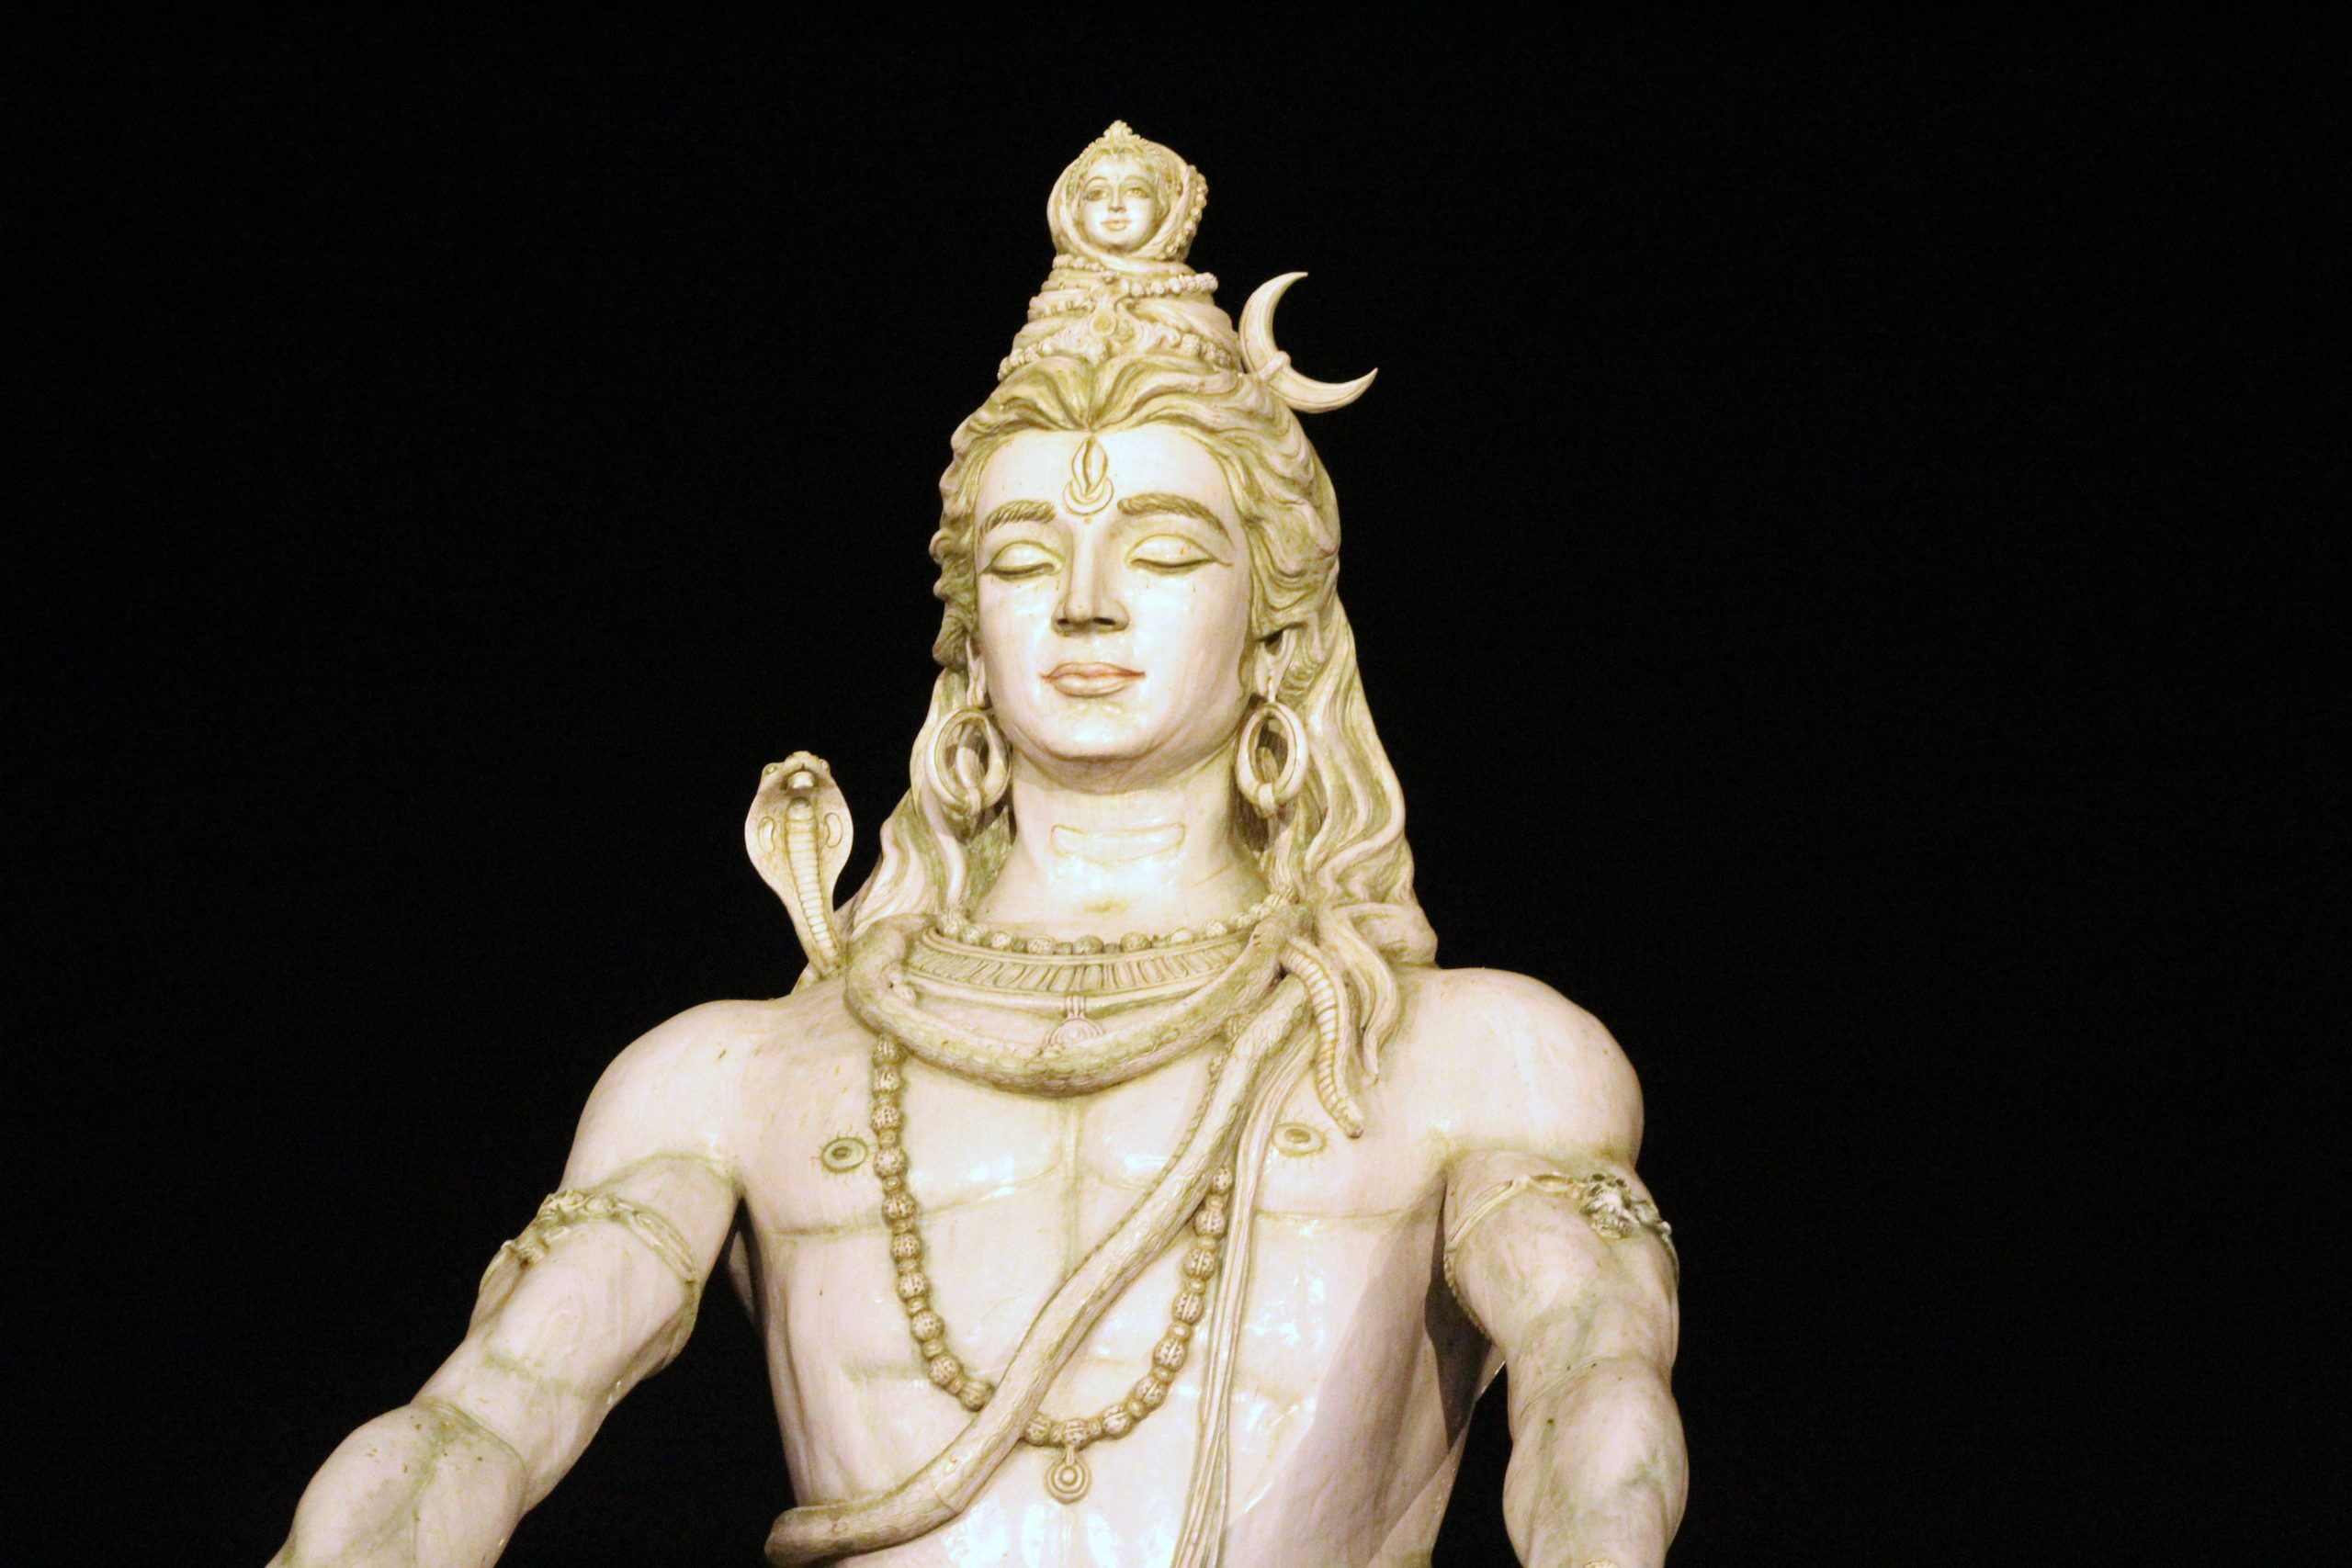 Maha Shivratri 2022: History and significance of the event